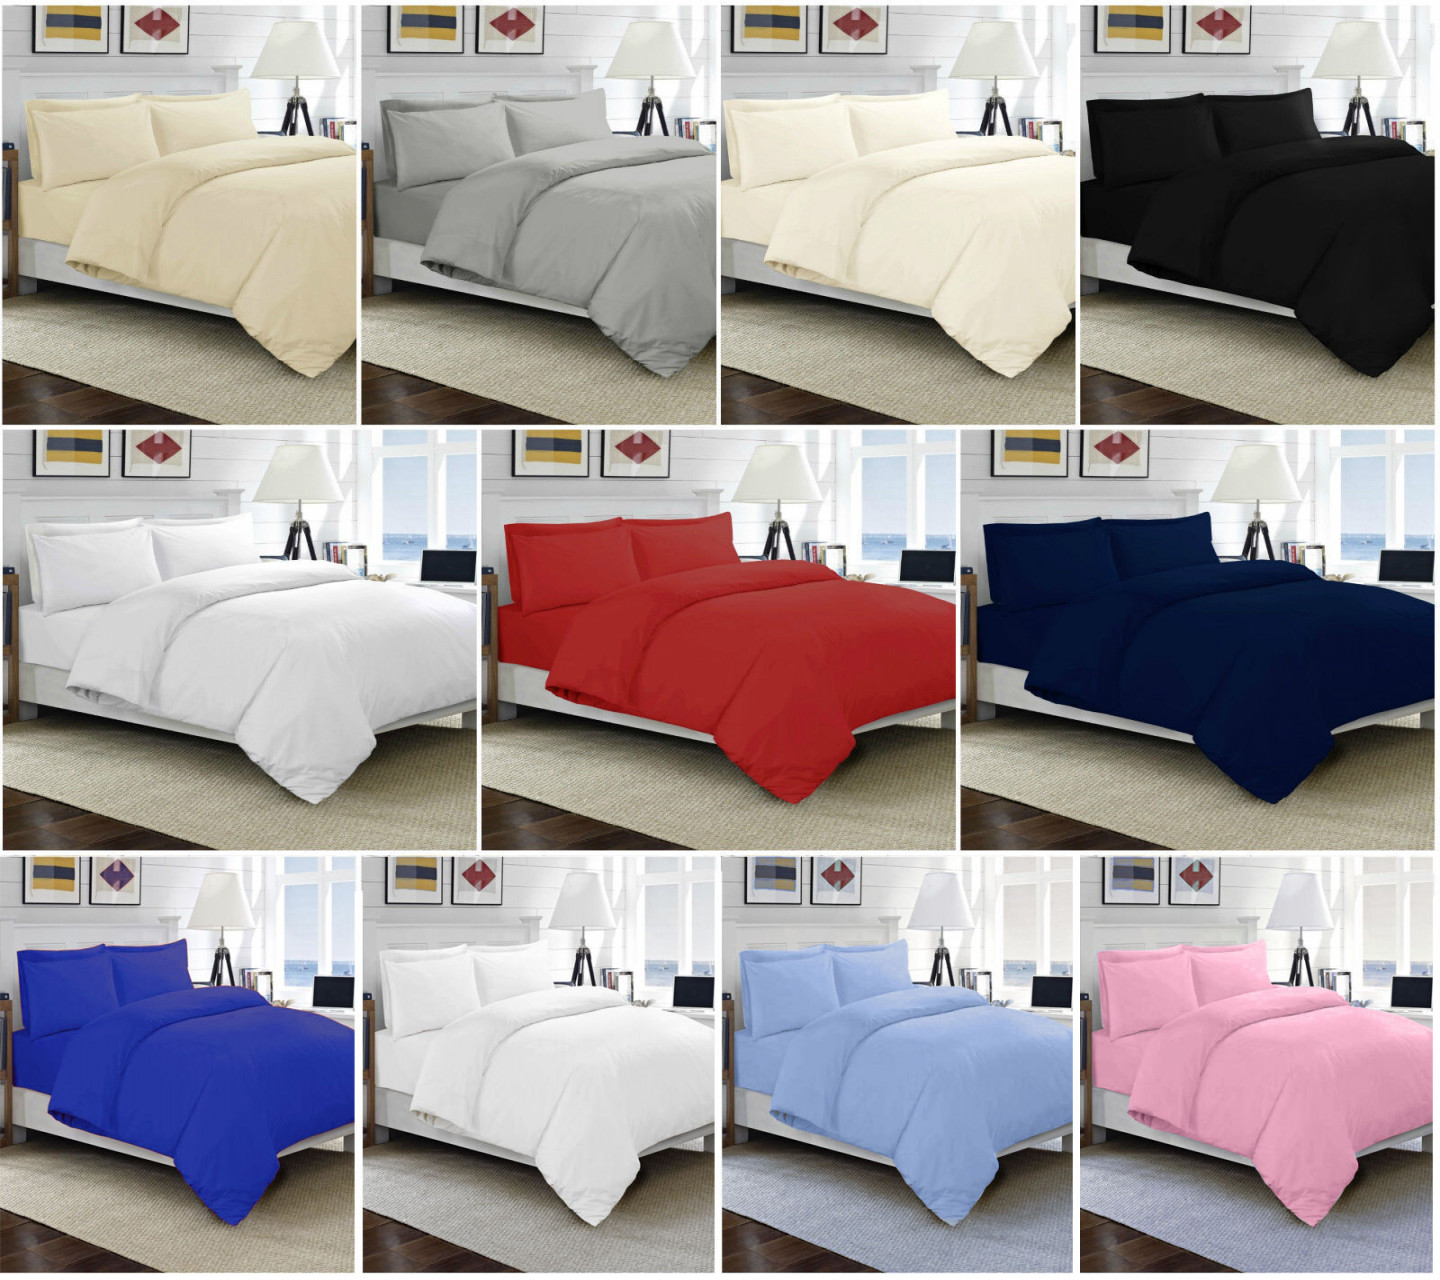 % EGYPTIAN COTTON DUVET QUILT COVER SET SINGLE DOUBLE KING SIZE BED  SHEETS